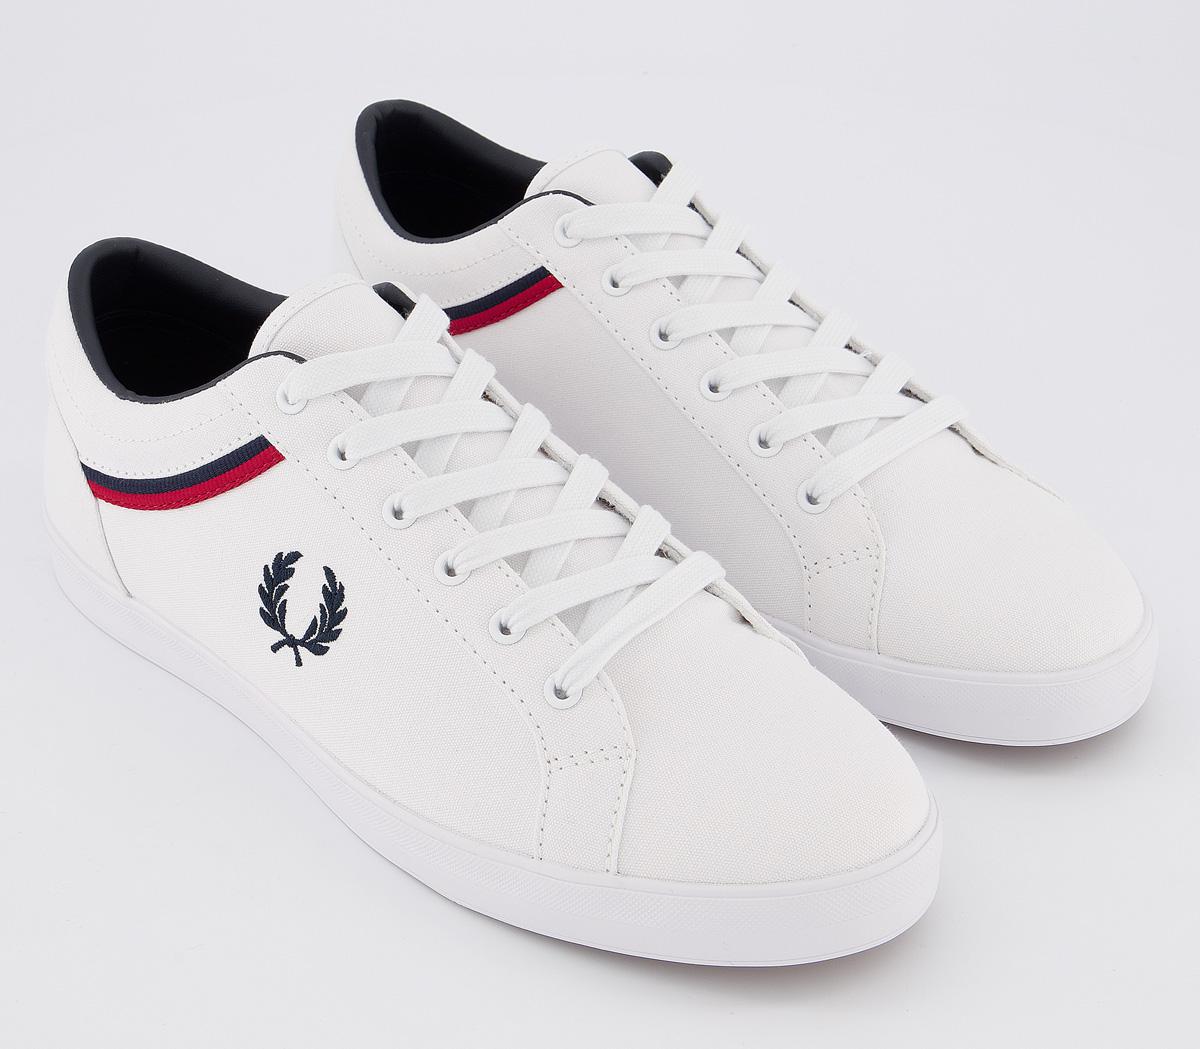 Fred Perry Baseline Trainers White Red Navy - His trainers